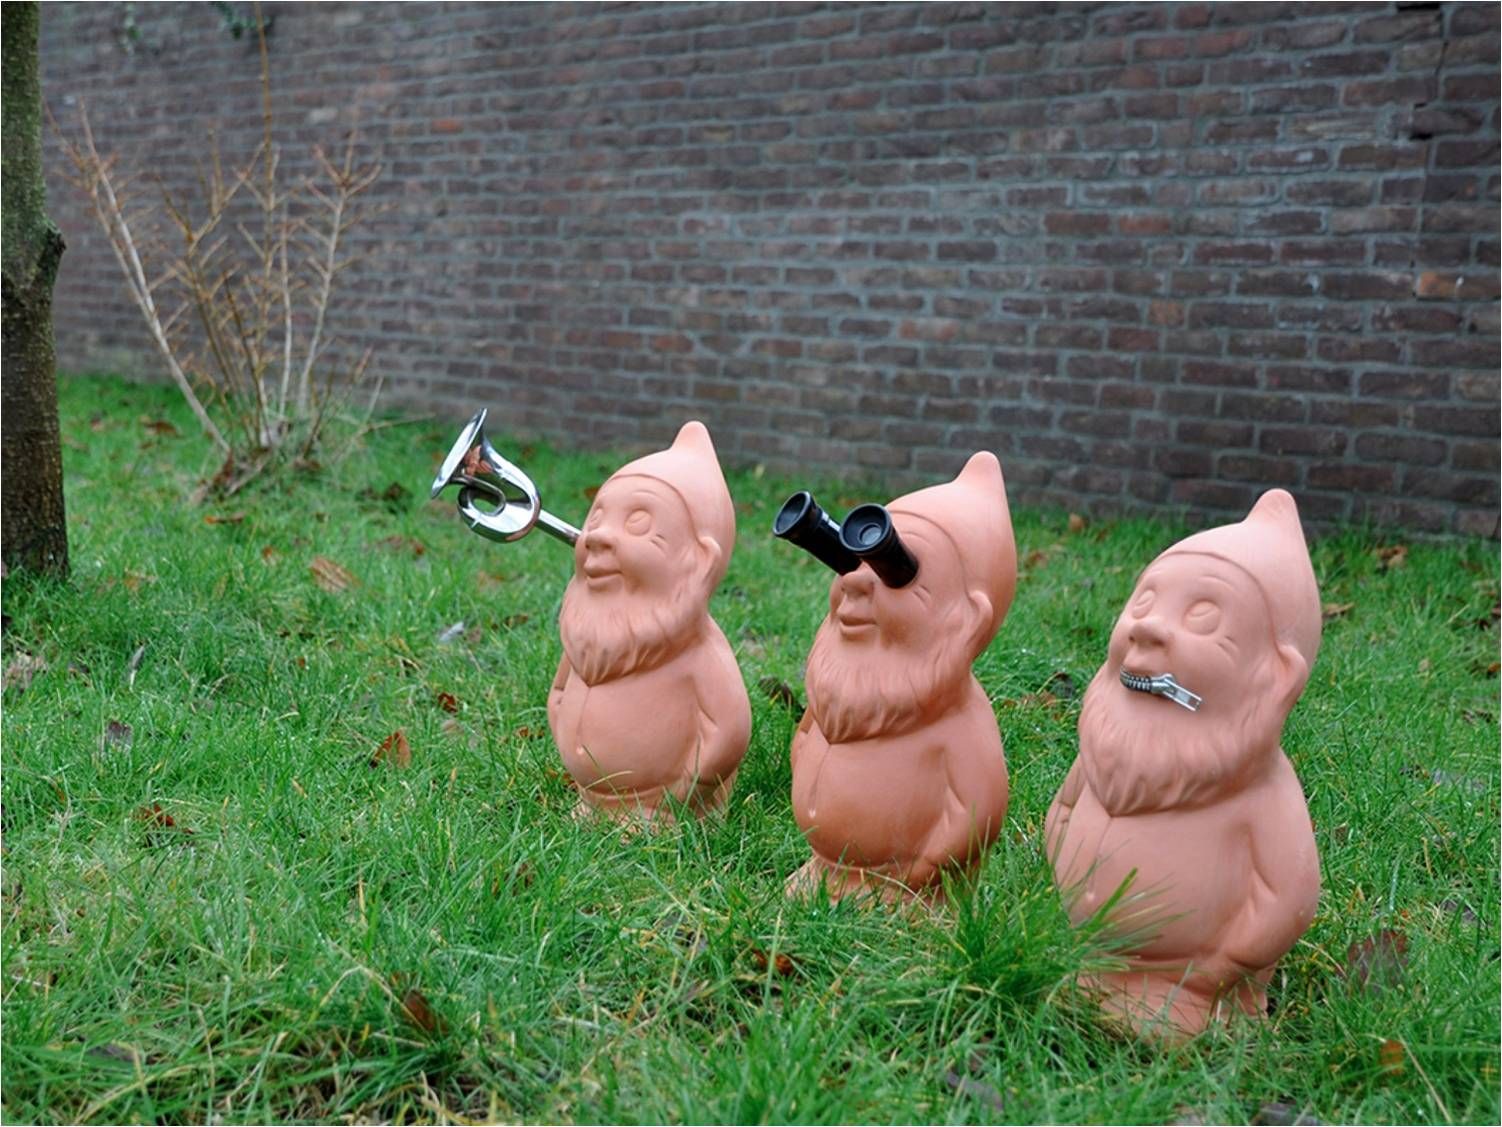 wise garden gnomes,2012(in collaboration with vincent wittenberg), installation in residential neighbourhood(2)